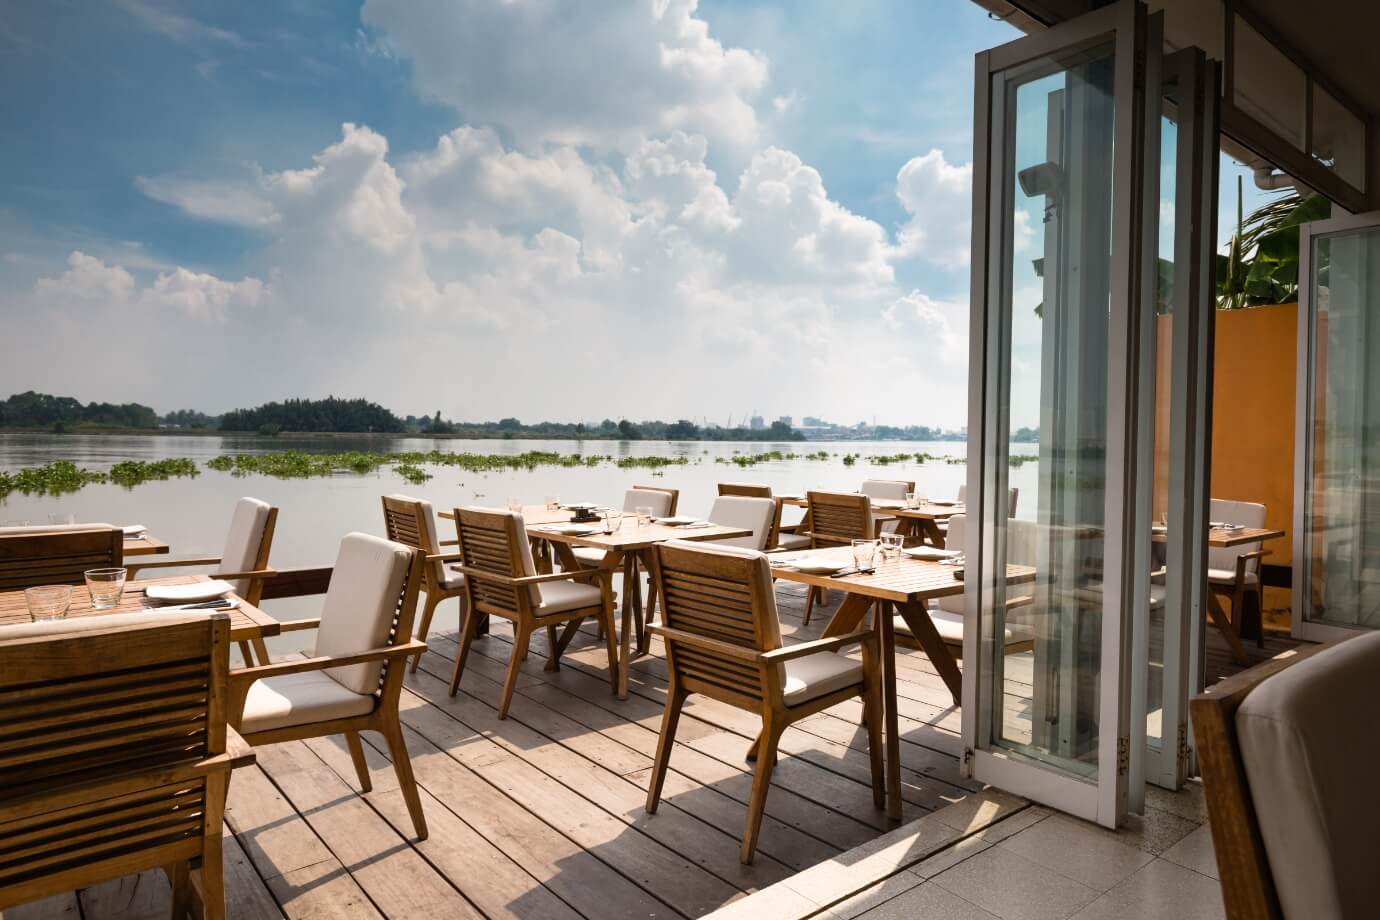 Tables and chairs placed outside on a marina overlooking the water in Sunbridge community, St. Cloud, Florida in Metro Orlando